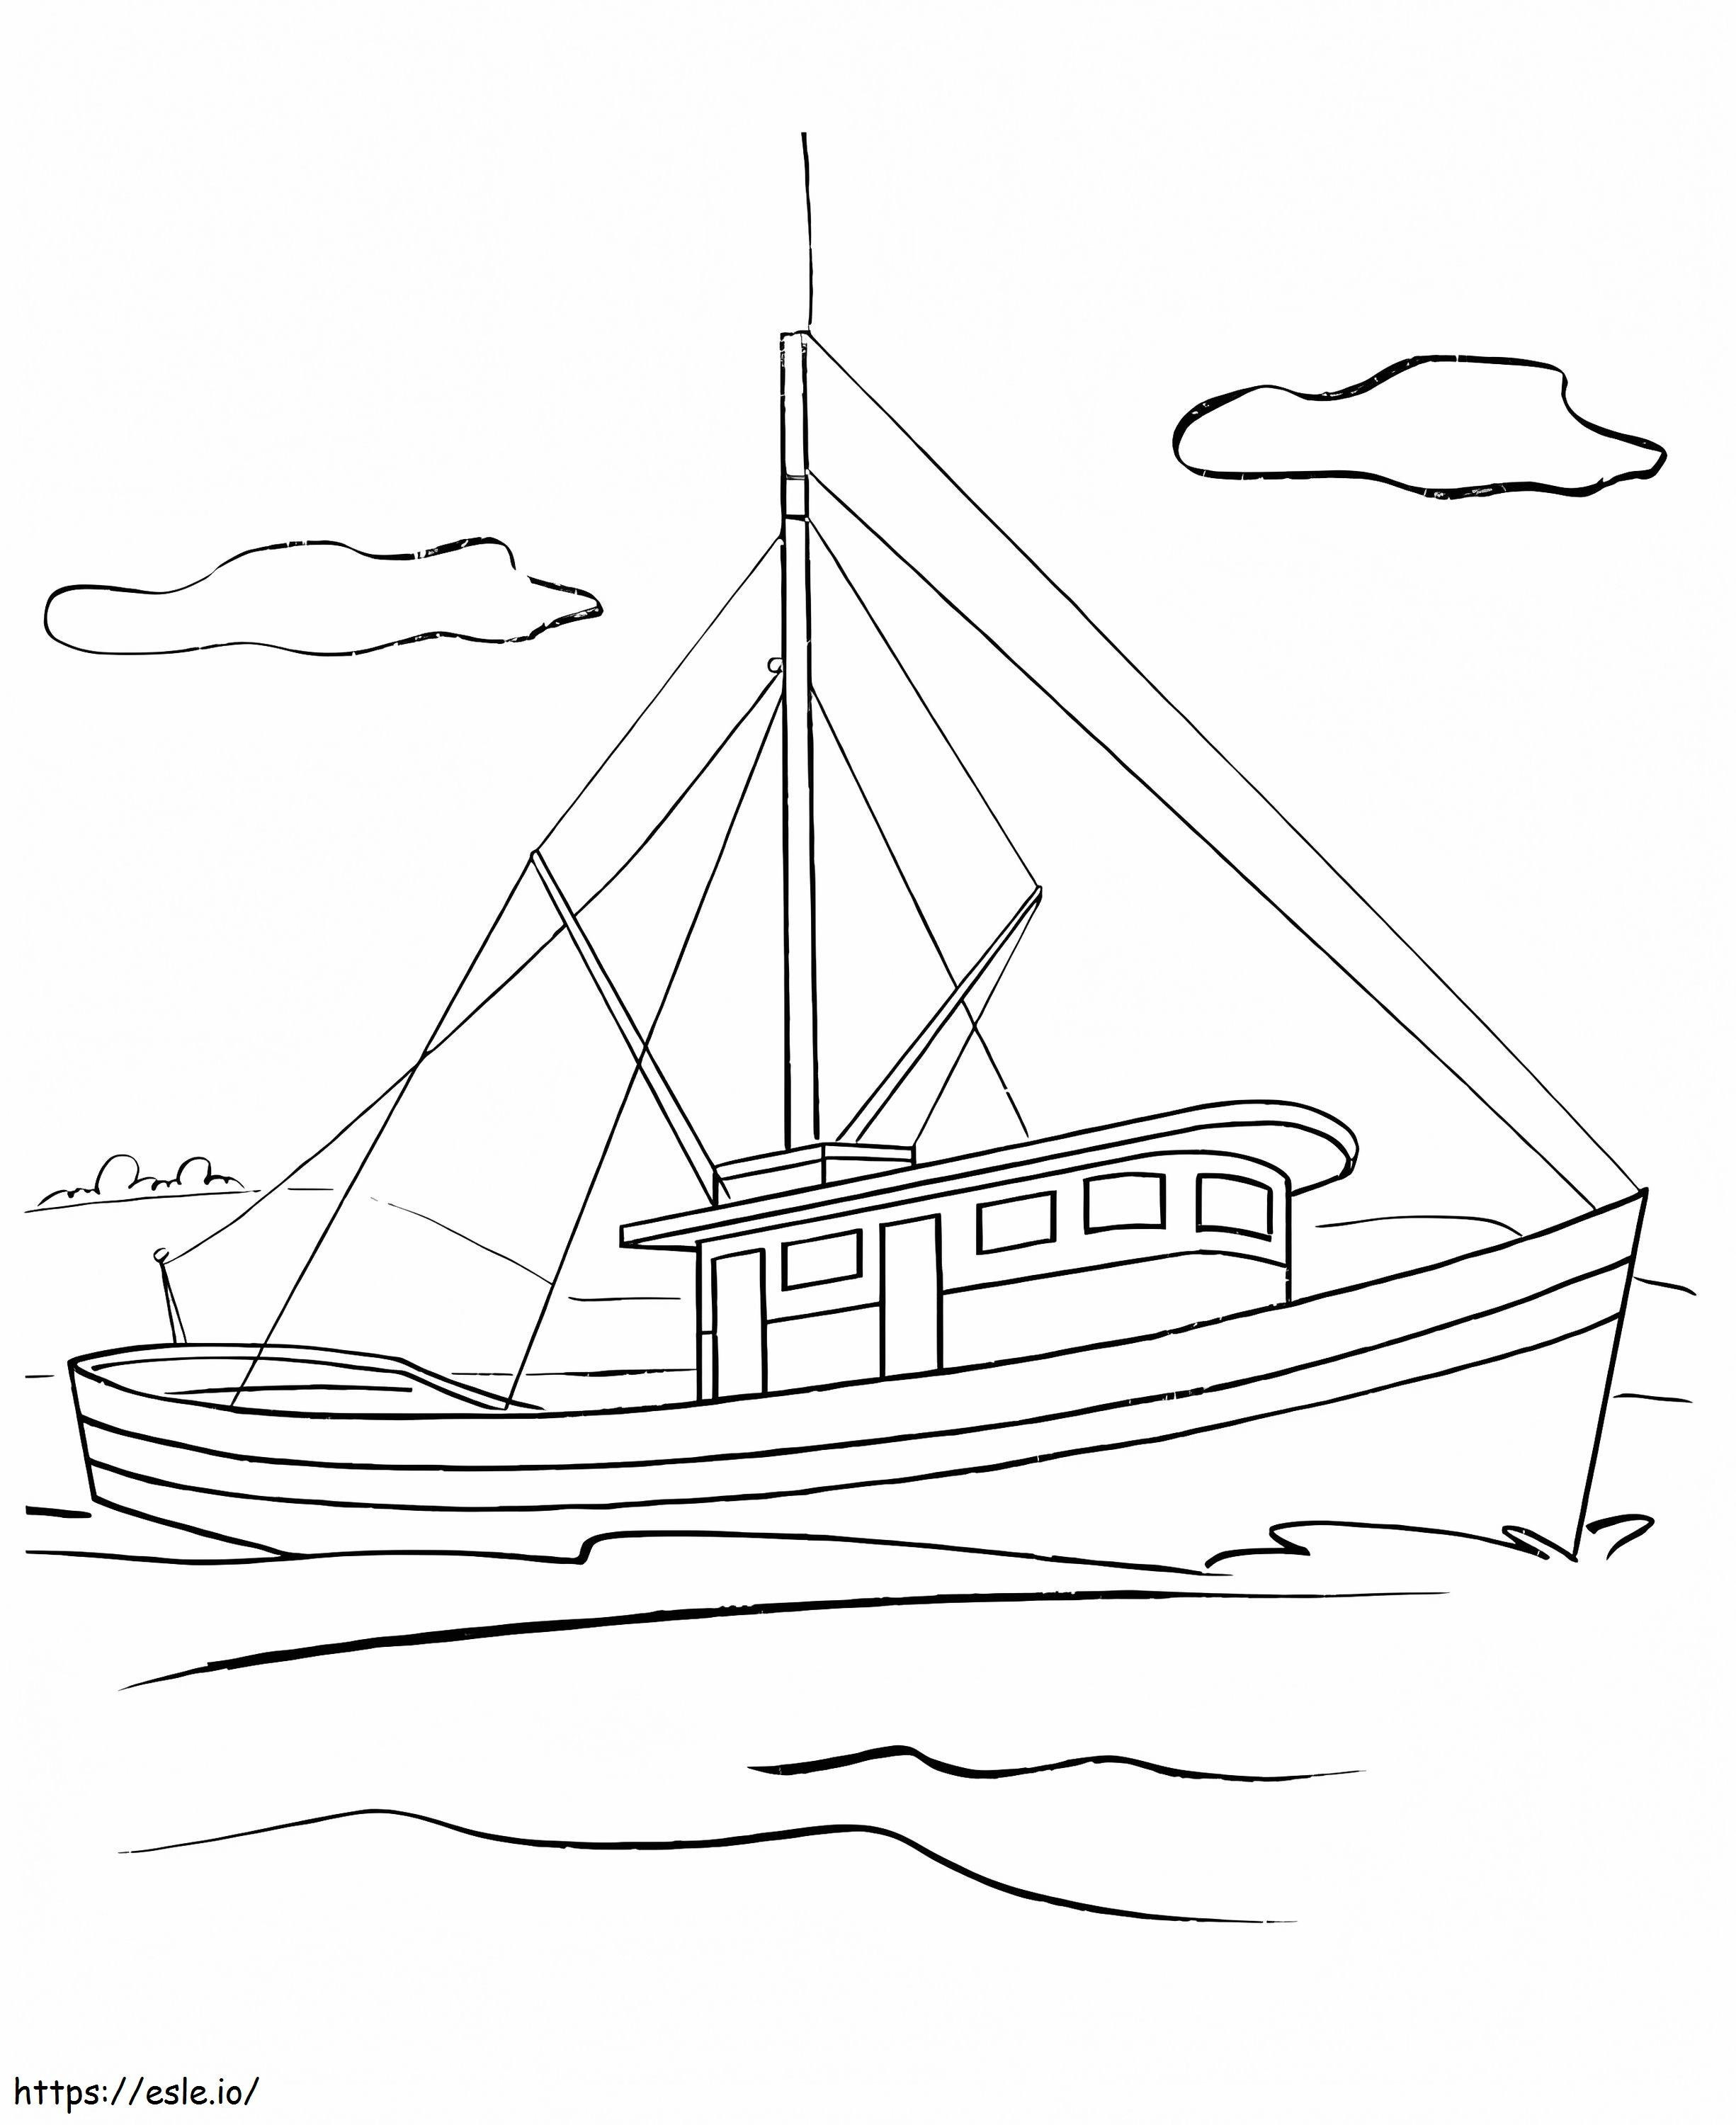 Boat 1 coloring page